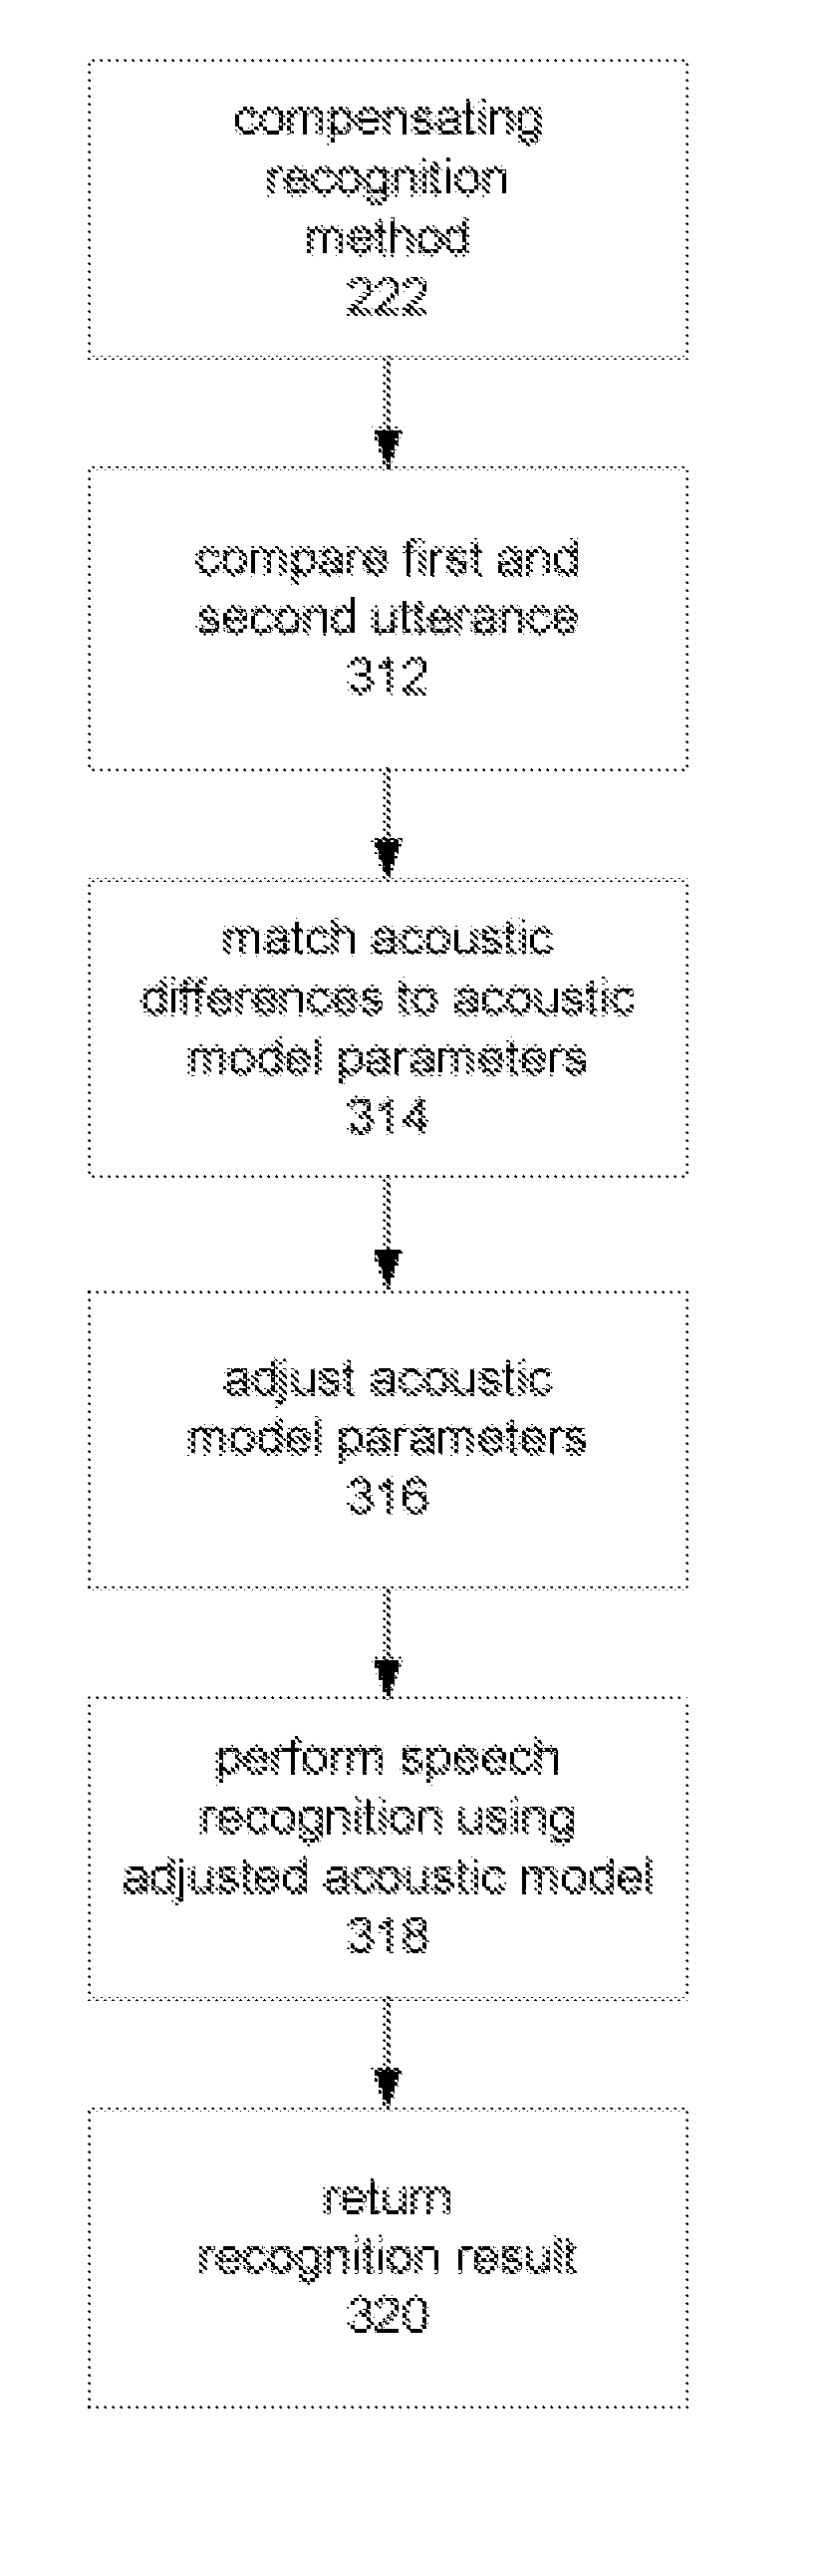 System and method for performing compensated speech recognition